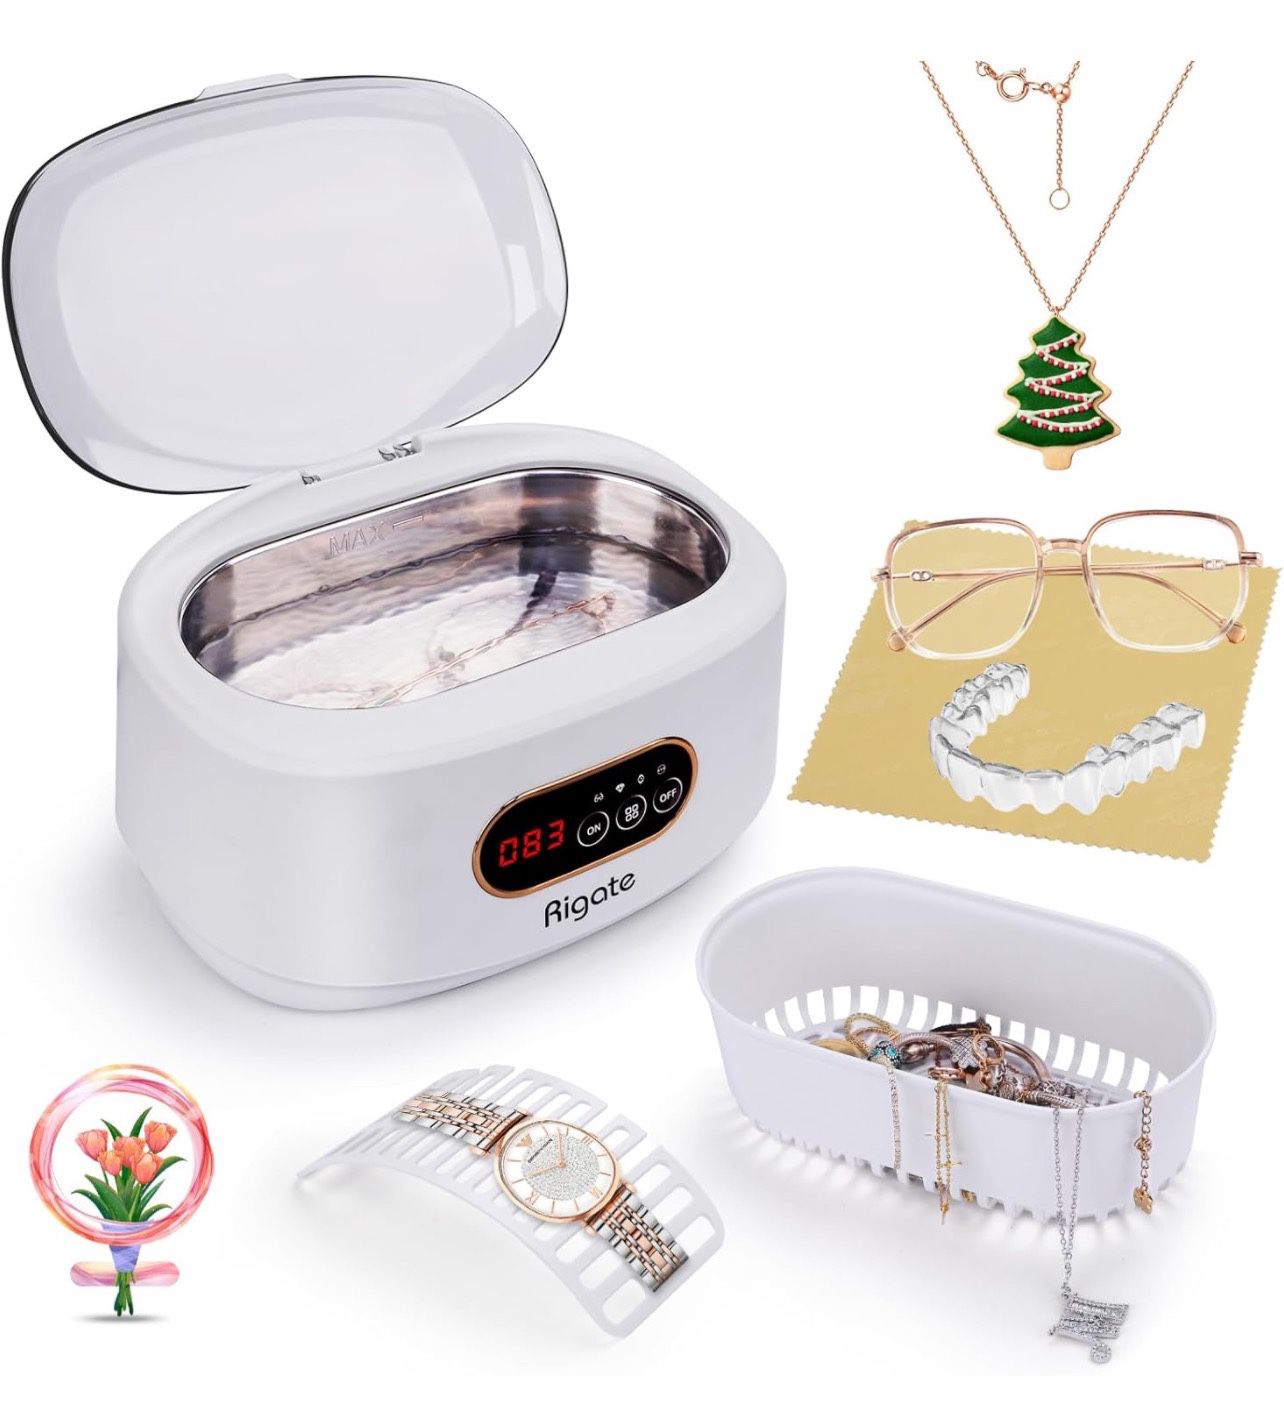 Ultrasonic Jewelry Cleaning Machine (22.3oz/660ml) with Glasses Ring Silver Glasses Teeth Fixer Professional Sound Wave Cleaning, 5-Speed Digital Time